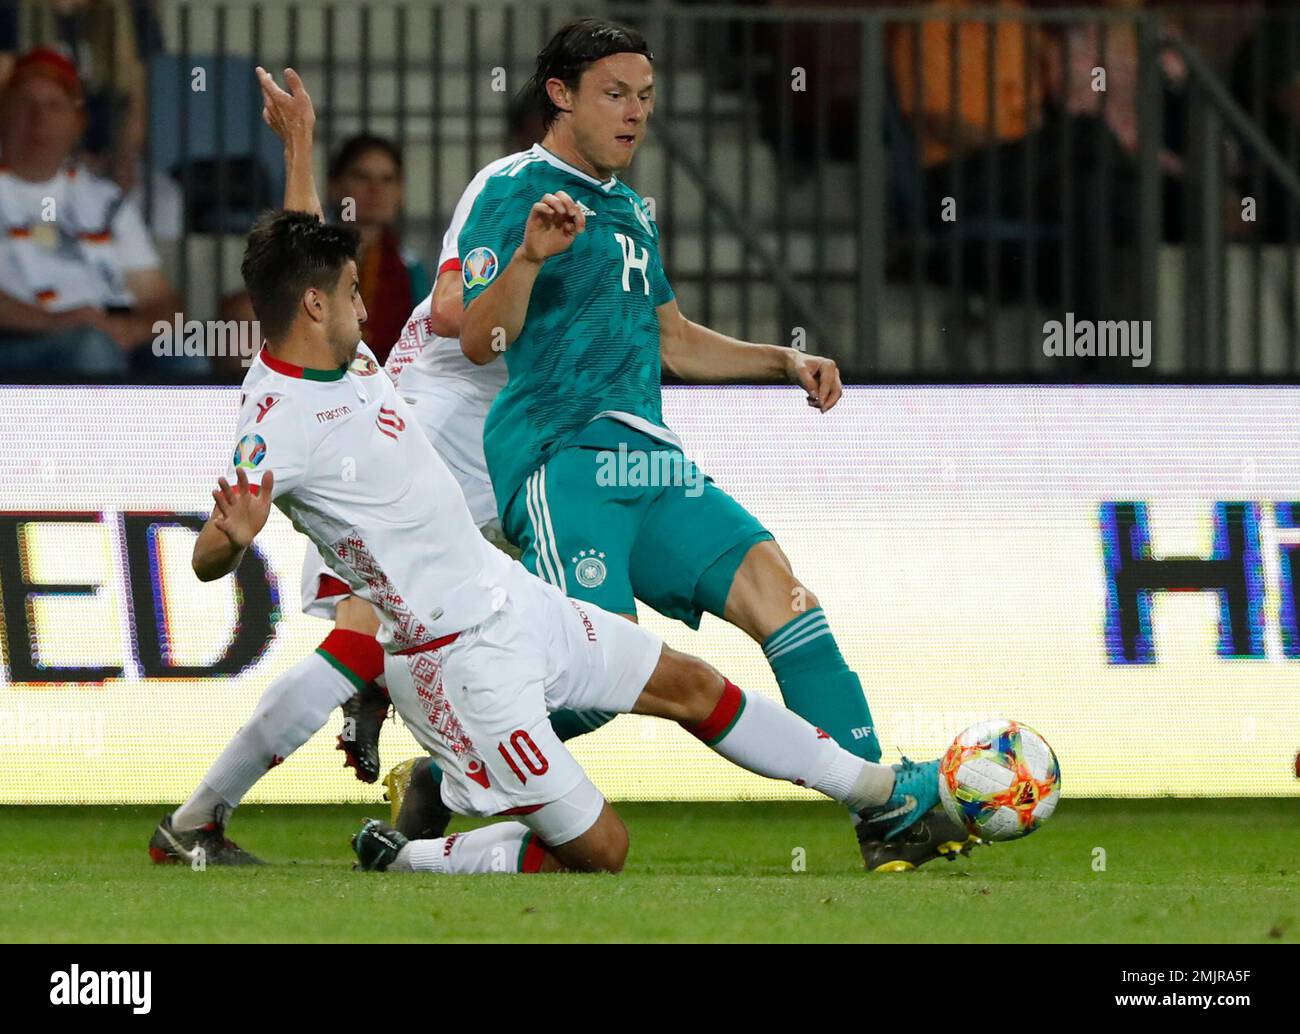 Belarus' Valeri Gromyko, left, vies for the ball with Germany's Nico Schulz during the Euro 2020 group C qualifying soccer match between Belarus and Germany at the Borisov-Arena in Borisov, Belarus, Saturday, June 8, 2019. (AP Photo/Mindaugas Kulbis) Stock Photo